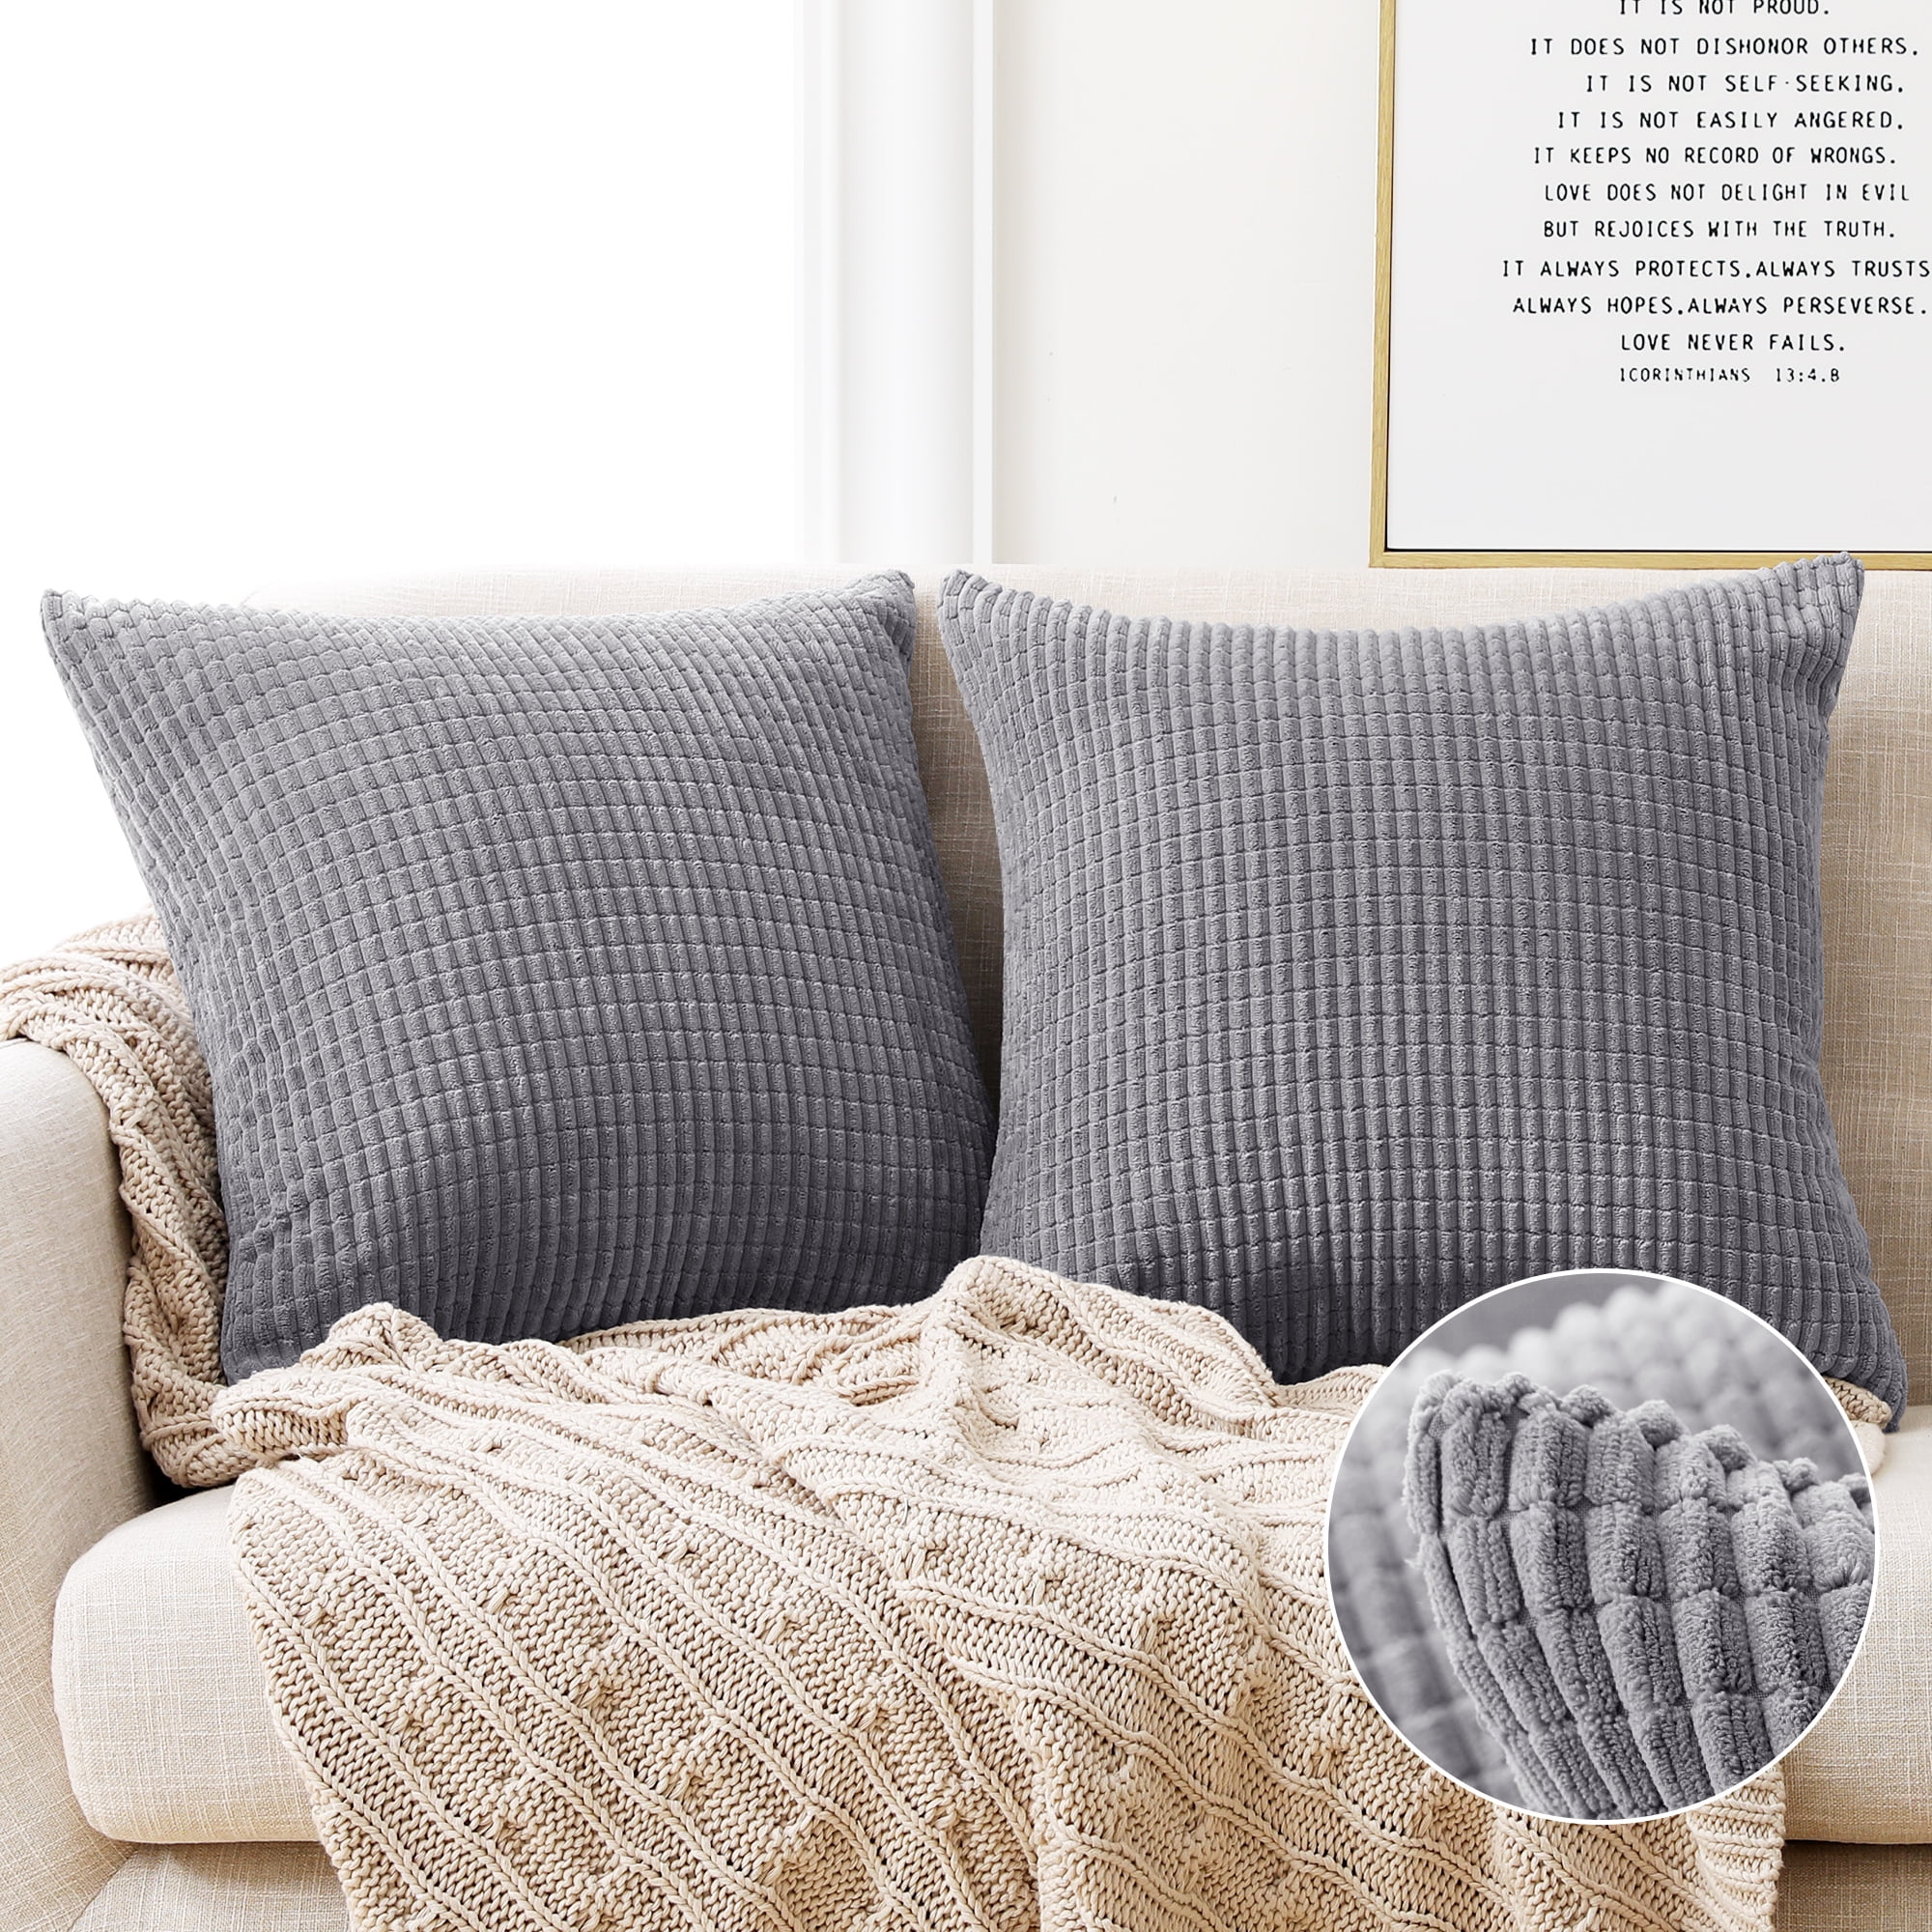 NAVIBULE Corduroy Throw Pillow Covers 18x18 Soft Decorative Pillow Covers  Plain Light Gray Throw Pillows for Couch Bed Sofa Pack of 2(18 x 18IN,  Light